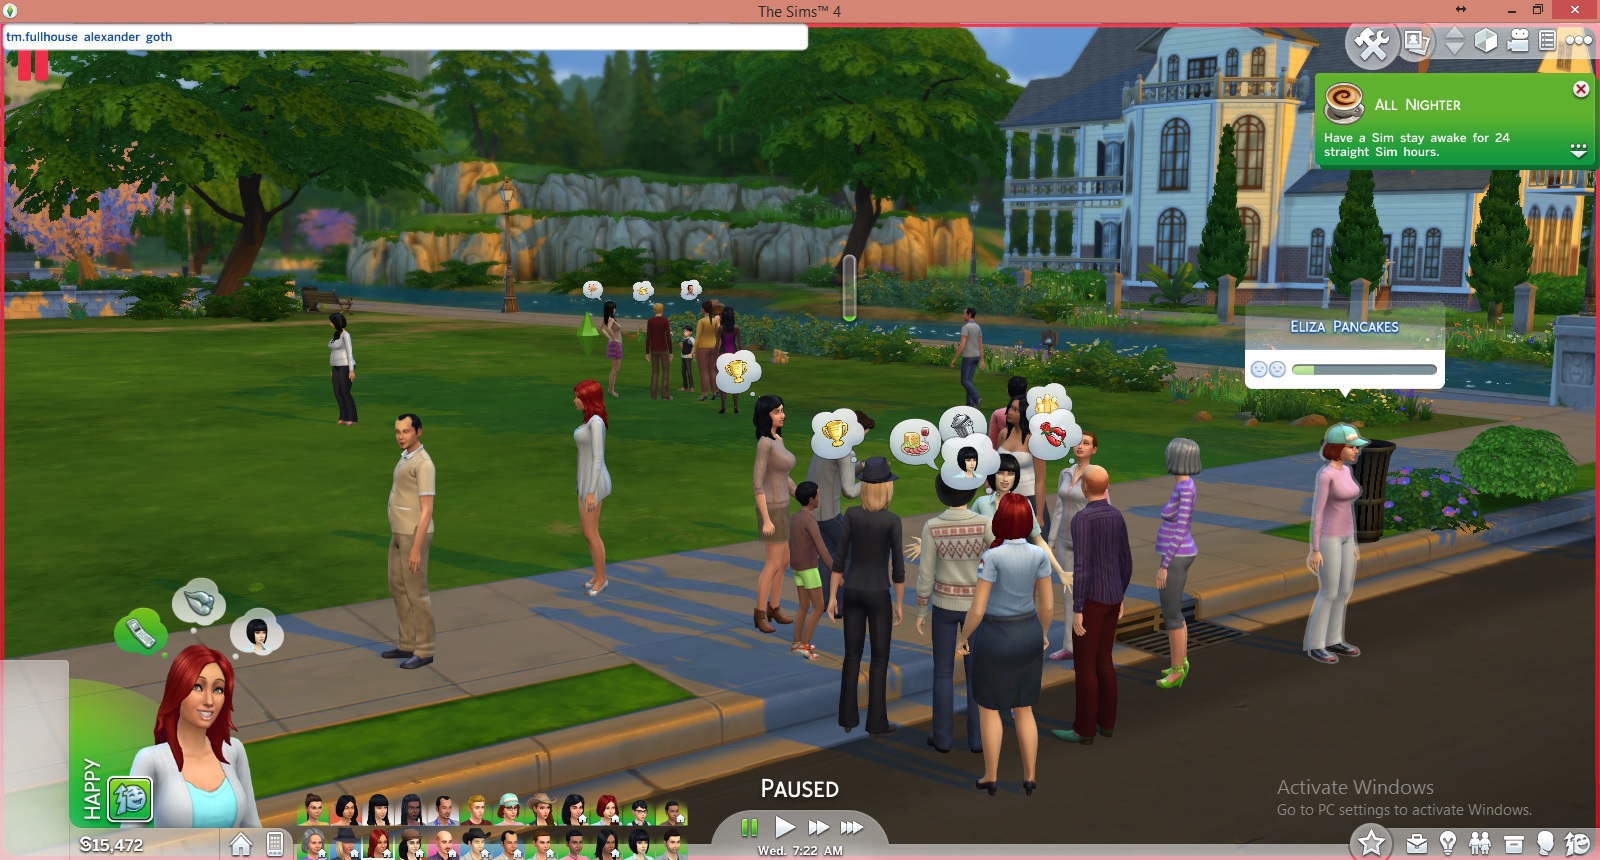 How to install mods and cheat codes in The Sims 4